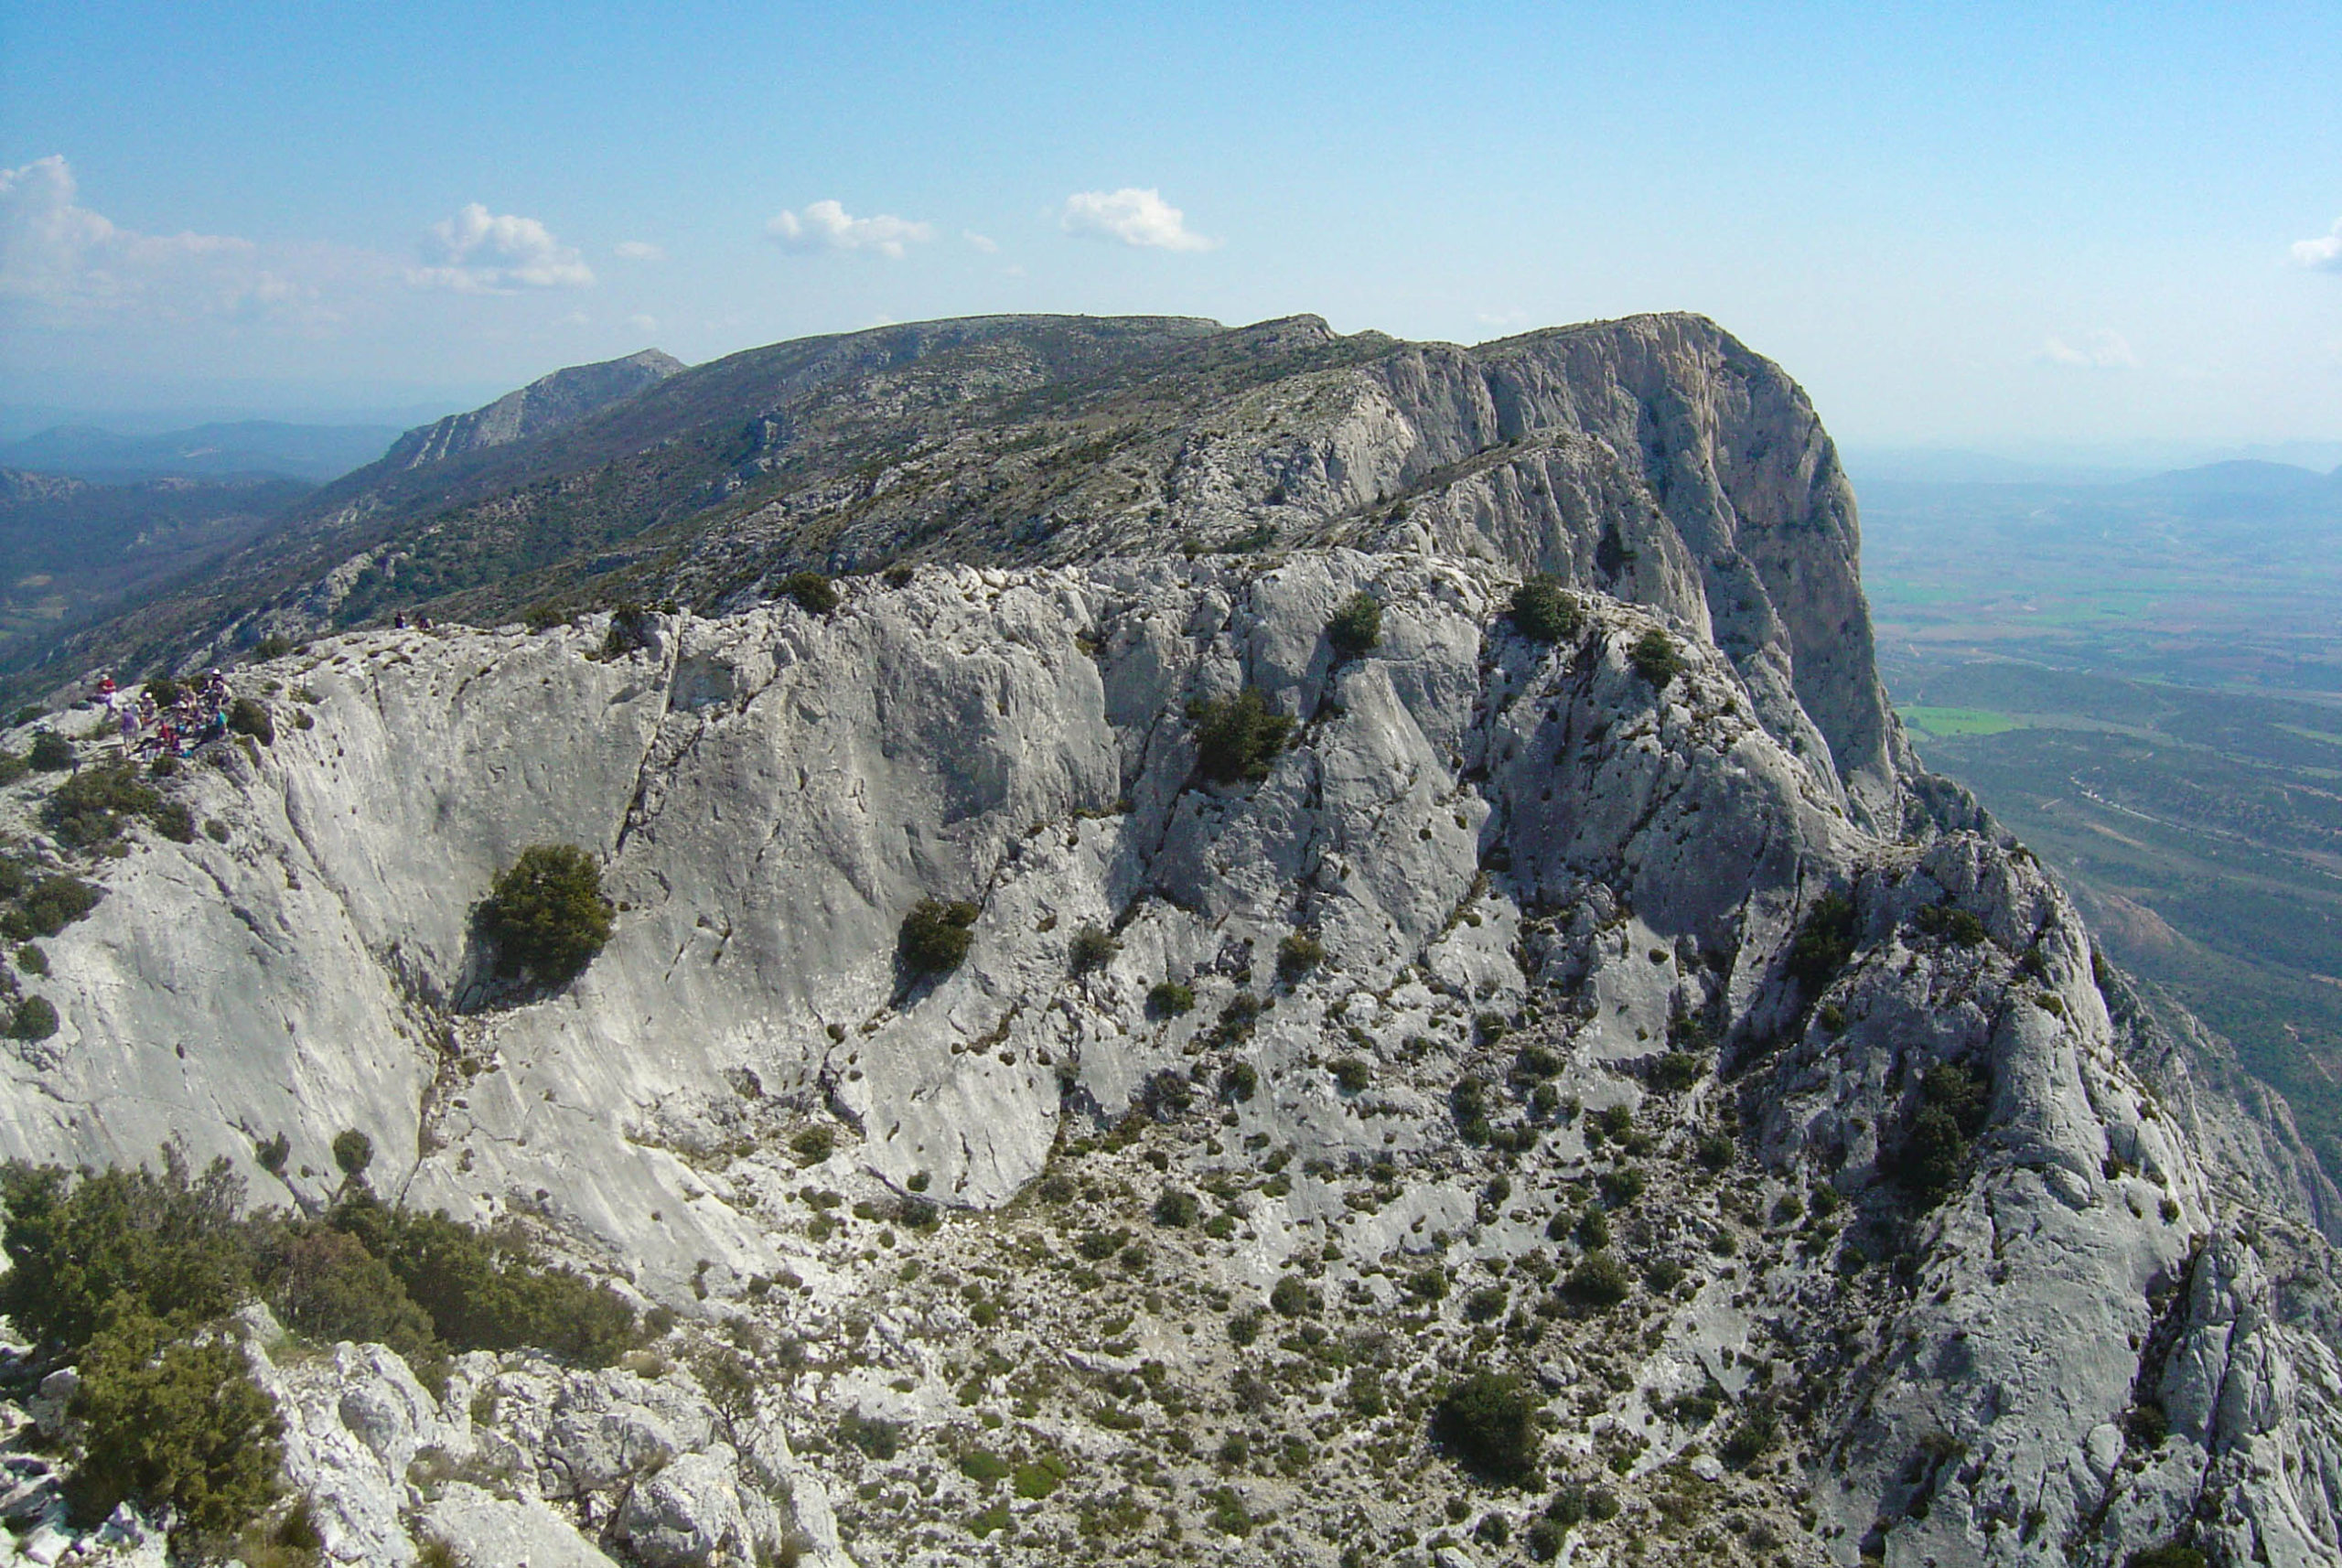 Pic des Mouches and the crest of Montagne Sainte-Victoire © Anthospace - licence [CC BY-SA 3.0] from Wikimedia Commons